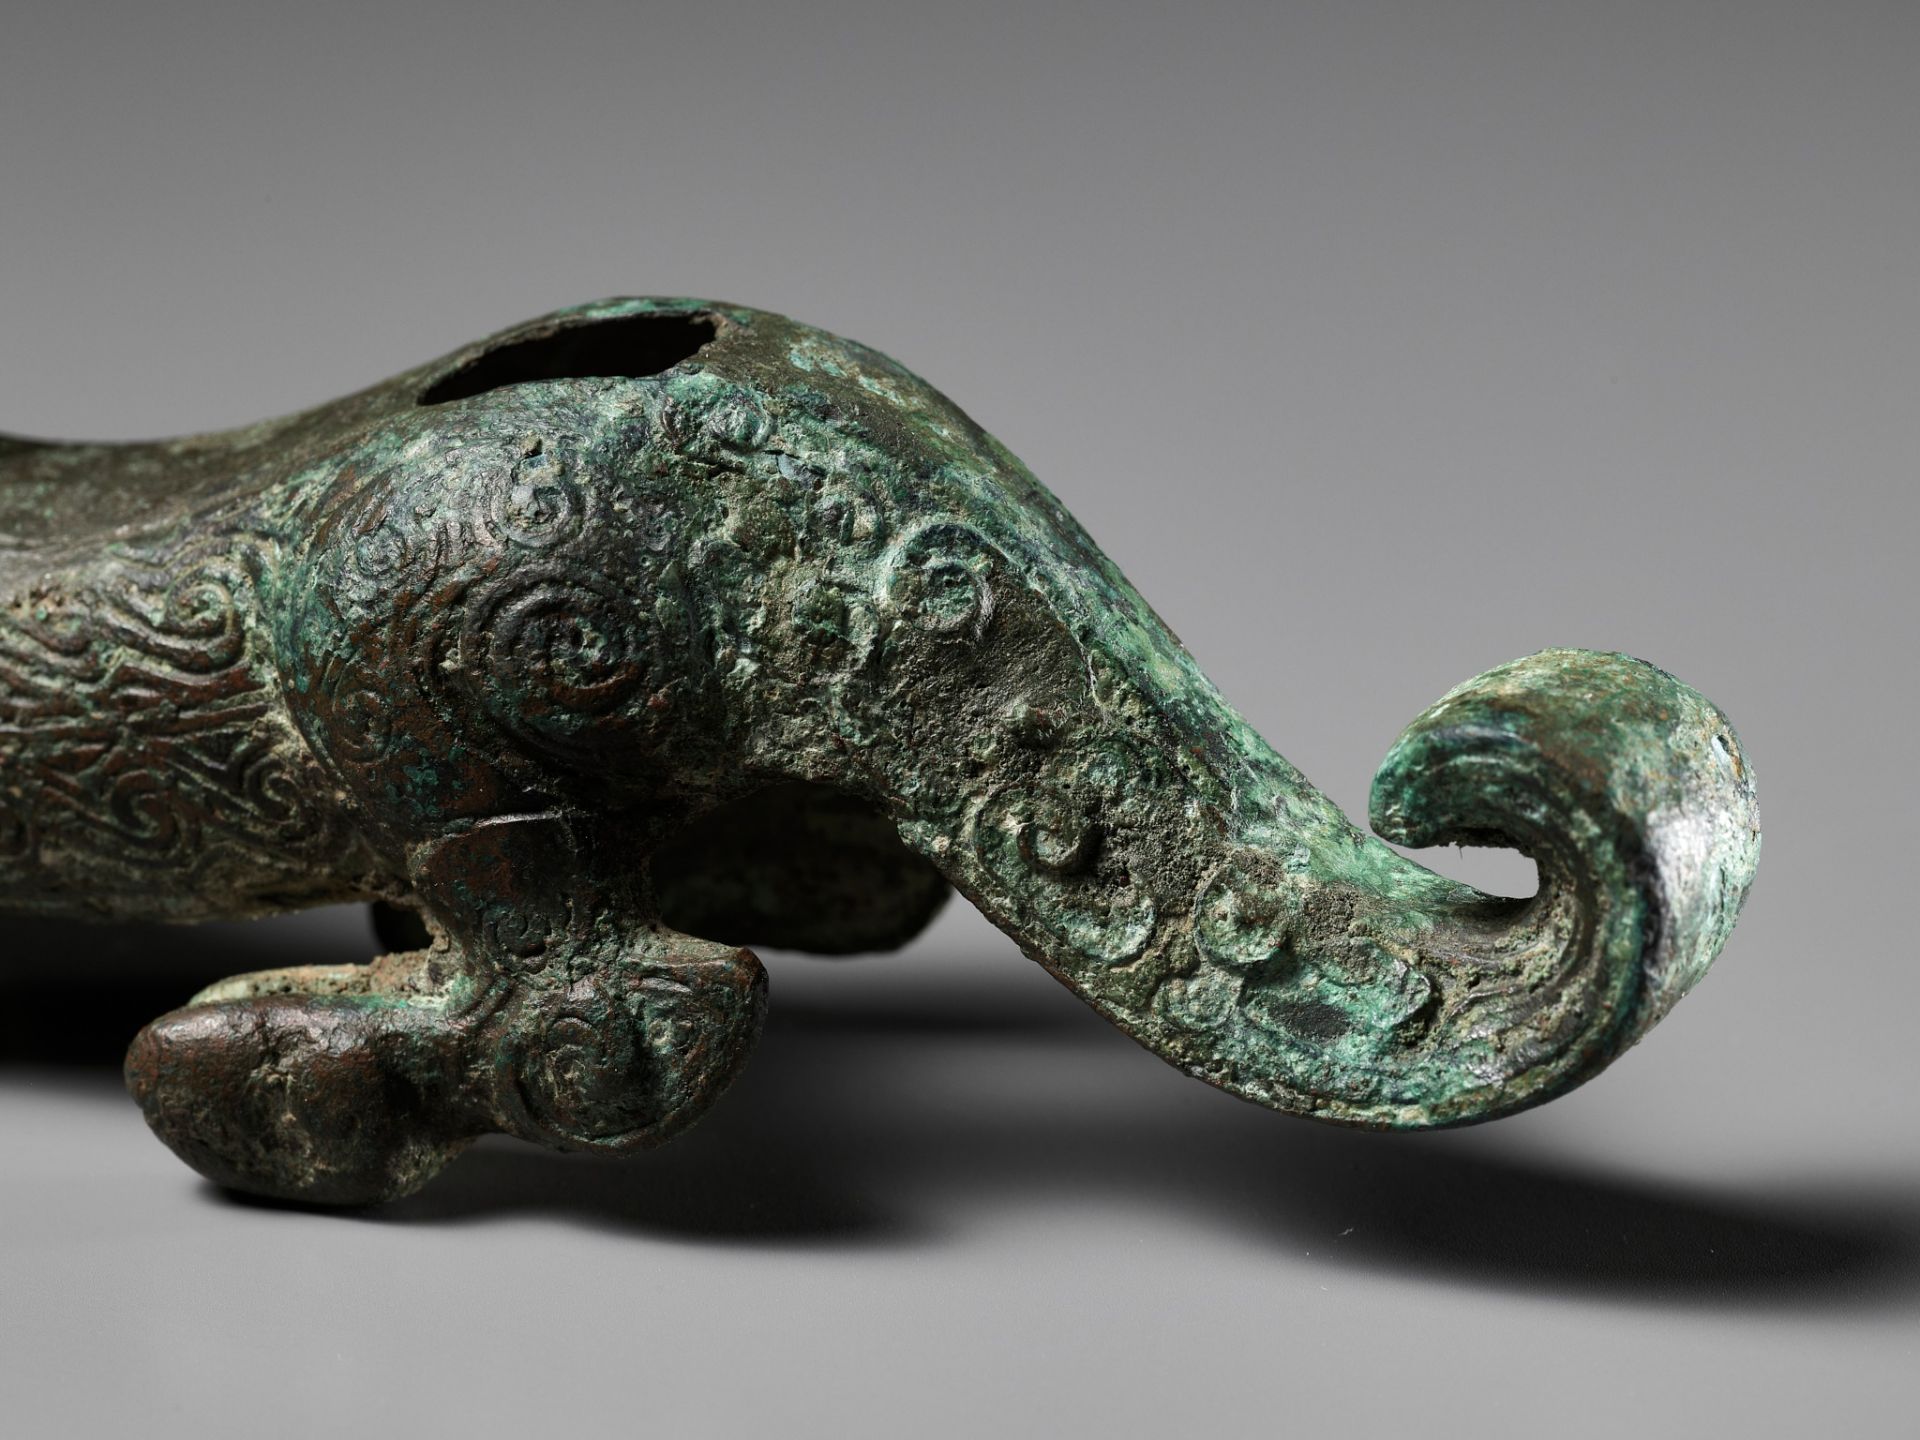 A SUPERB BRONZE FIGURE OF A DRAGON, EASTERN ZHOU DYNASTY, CHINA, 770-256 BC - Image 19 of 23